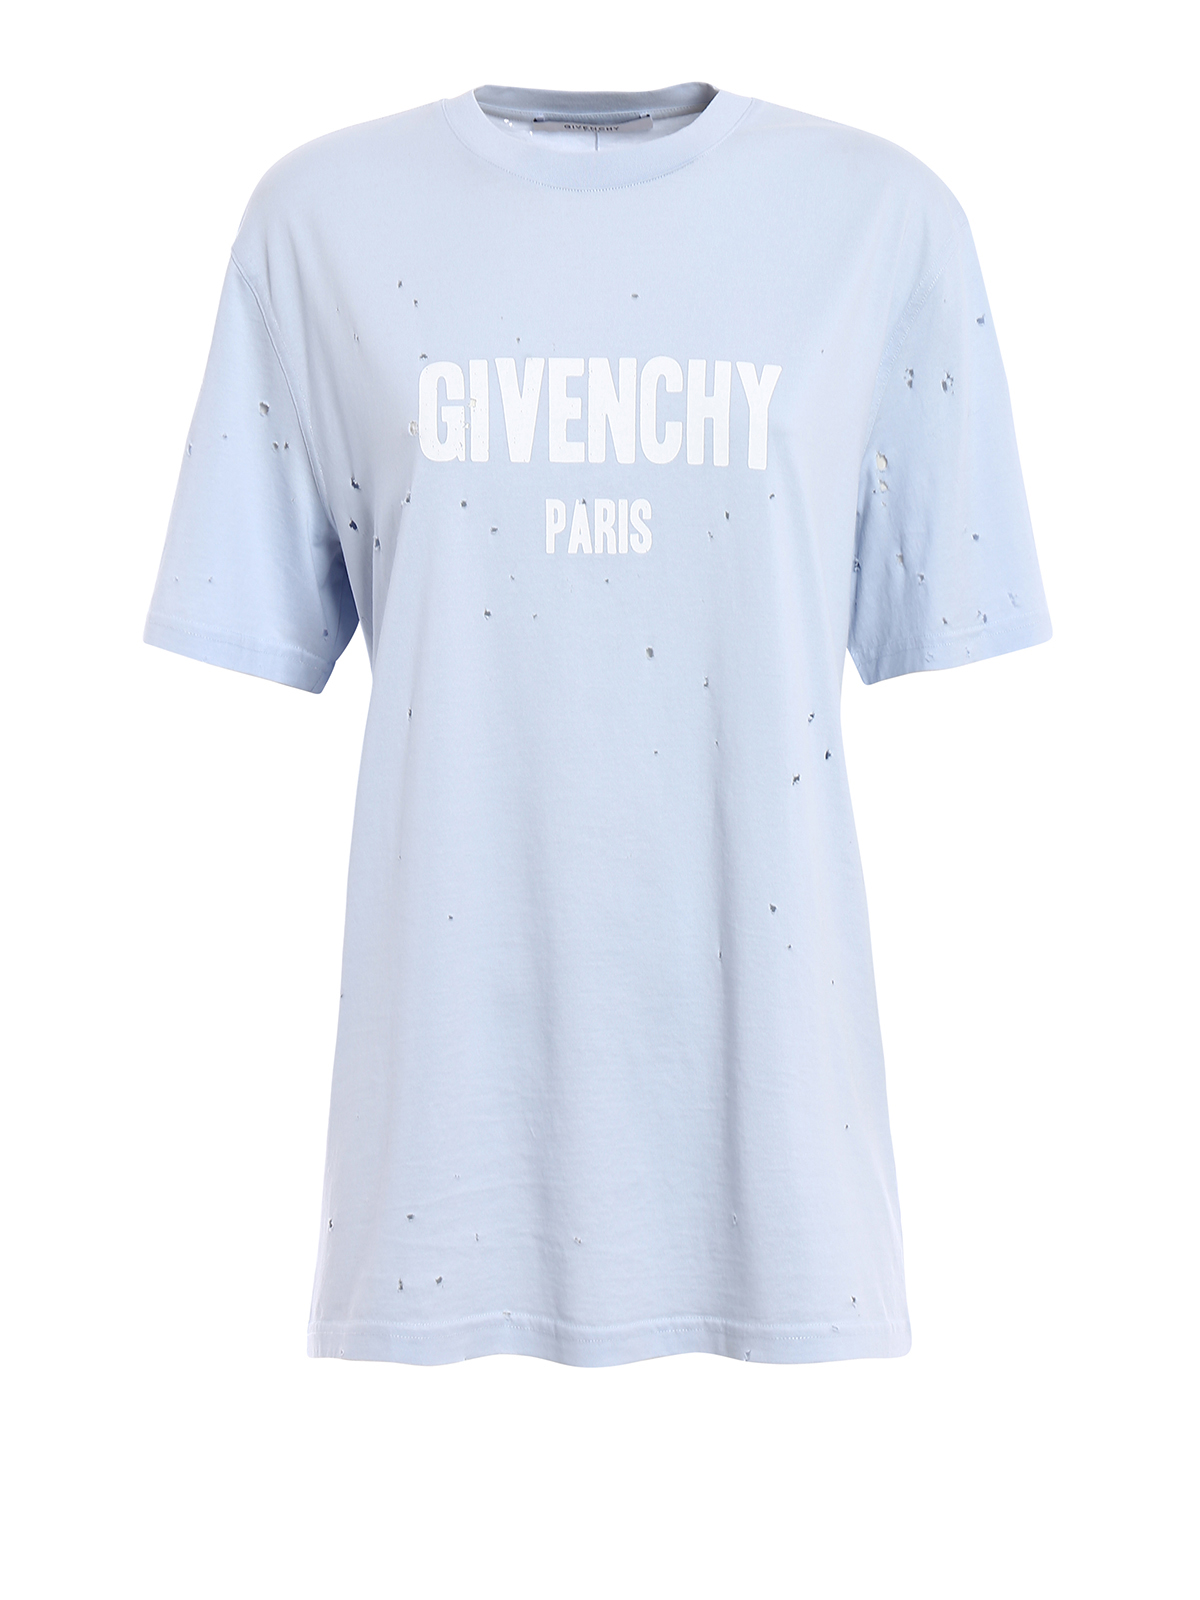 givenchy baby blue t shirt